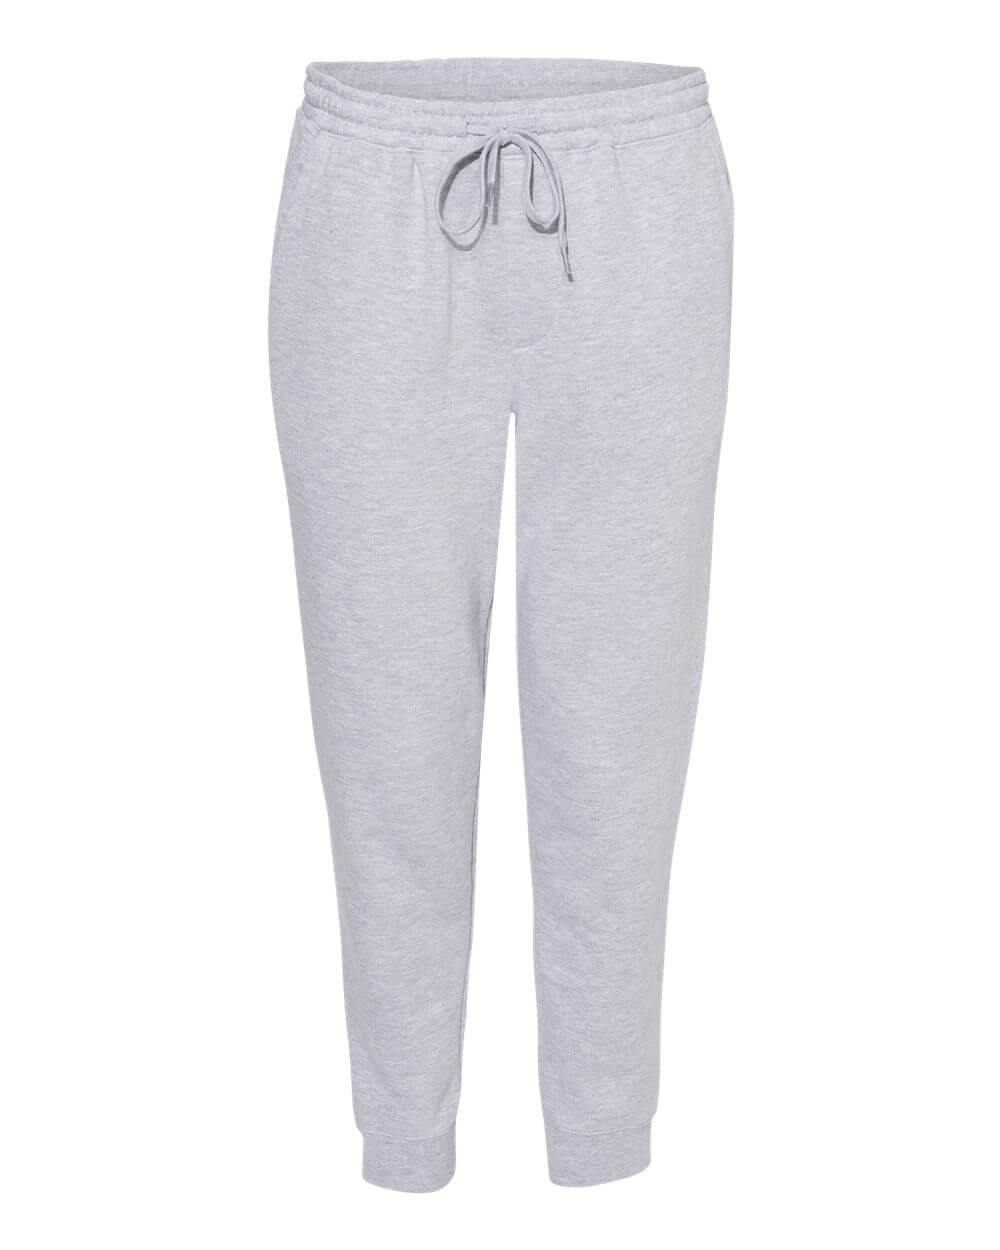 Custom Independent Trading Co. Midweight Fleece Pants